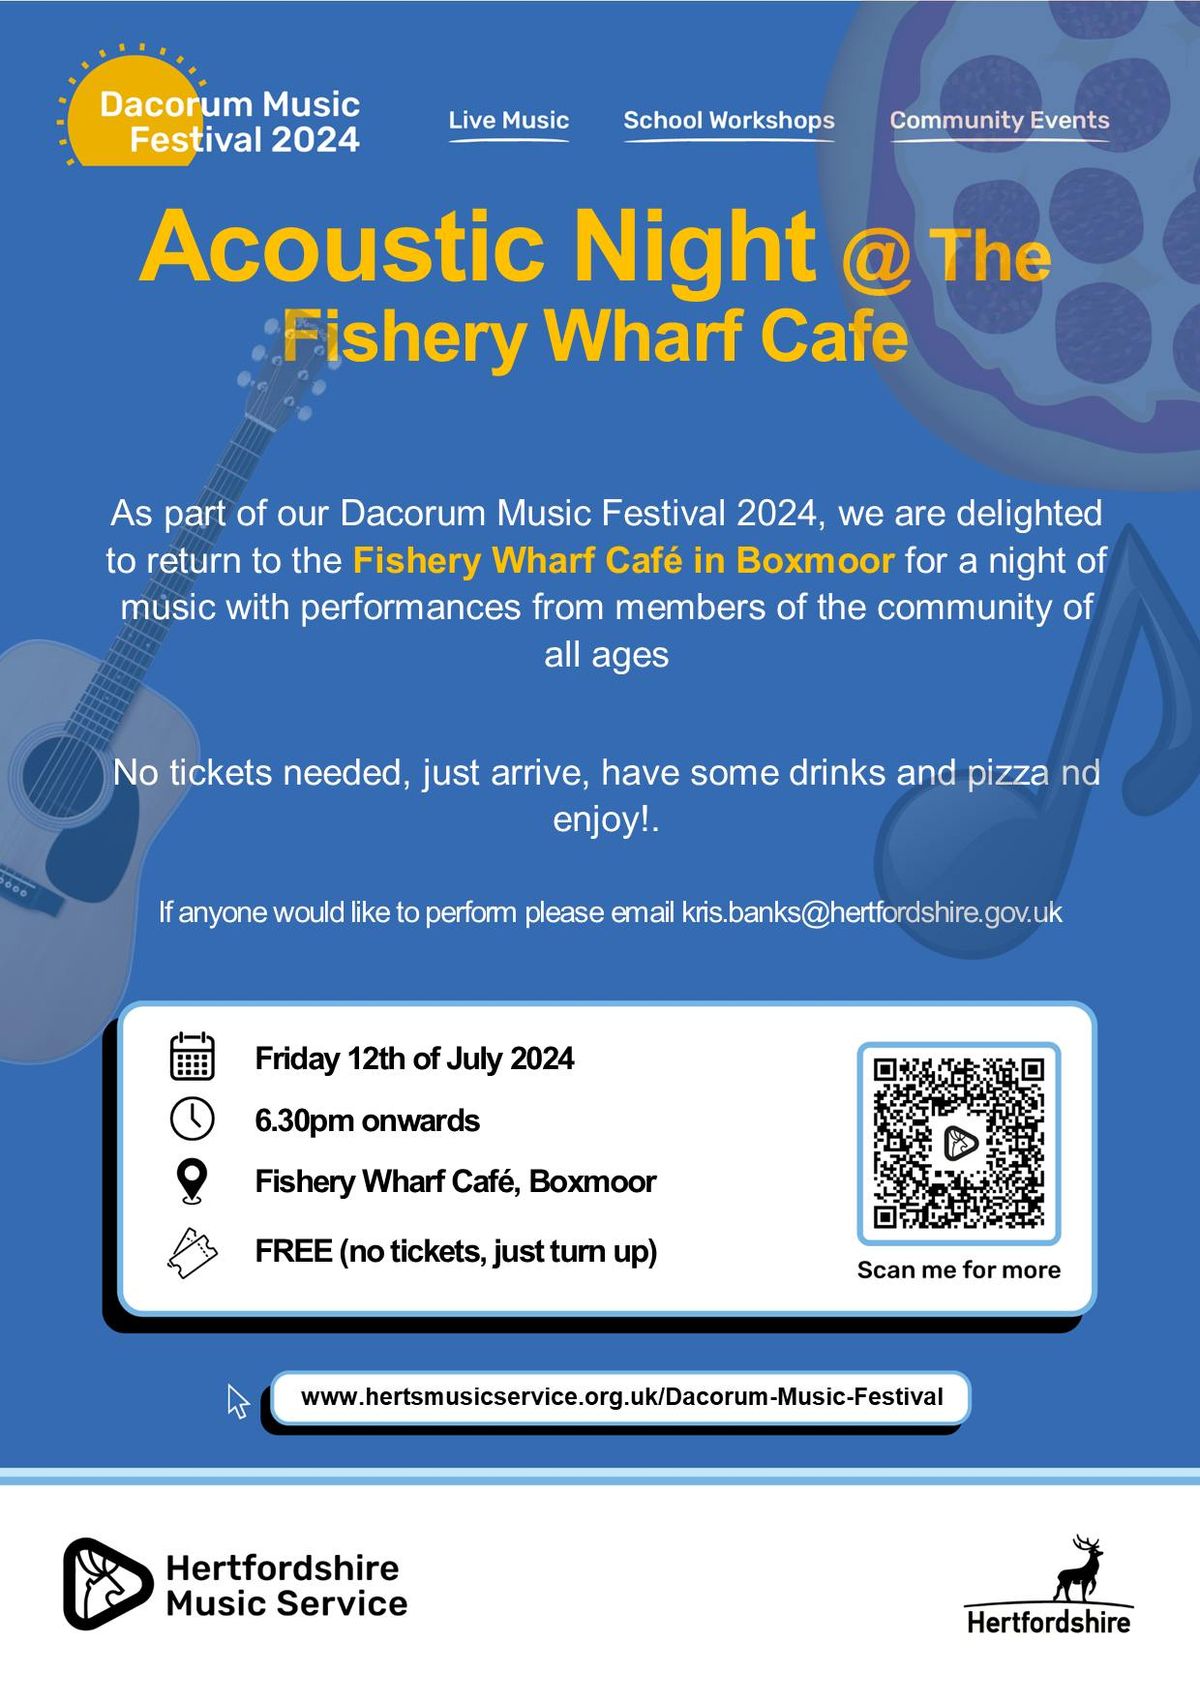 Acoustic Night @ The Fishery Wharf Cafe